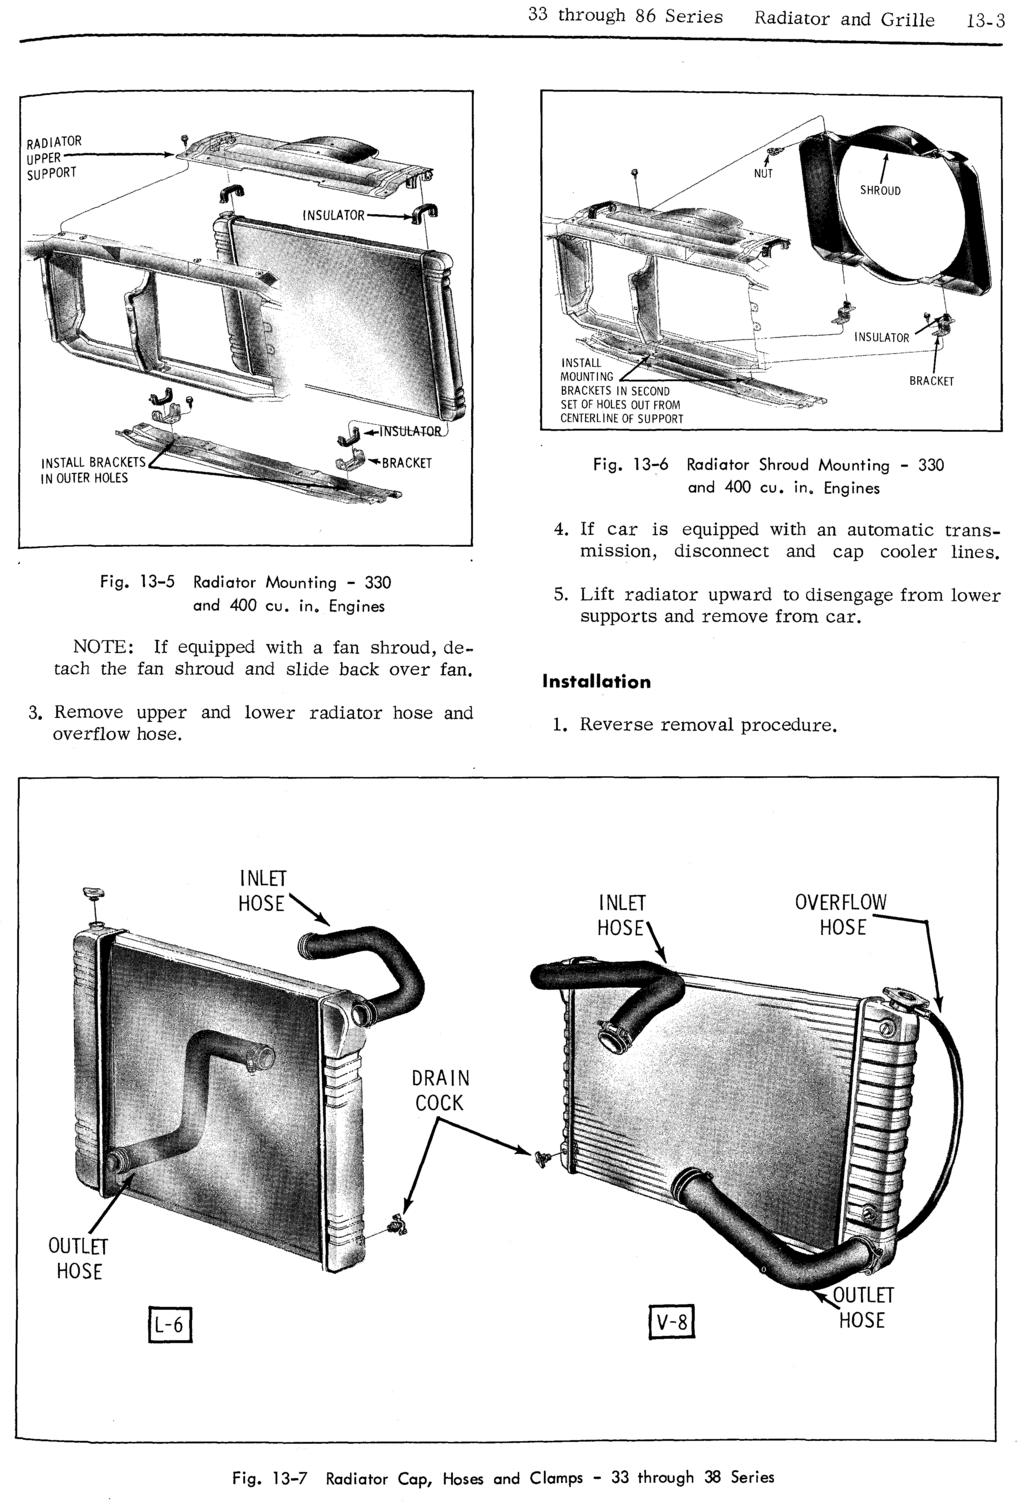 33 through 86 Series Radiator and Grille 13-3 Fig. 13-6 Radiator Shroud Mounting - 330 and 400 cu. in. Engines Fig. 13-5 Radiator Mounting - 330 and 400 cu. in. Engines NOTE: If equipped with a fan shroud, detach the fan shroud and slide back over fan.